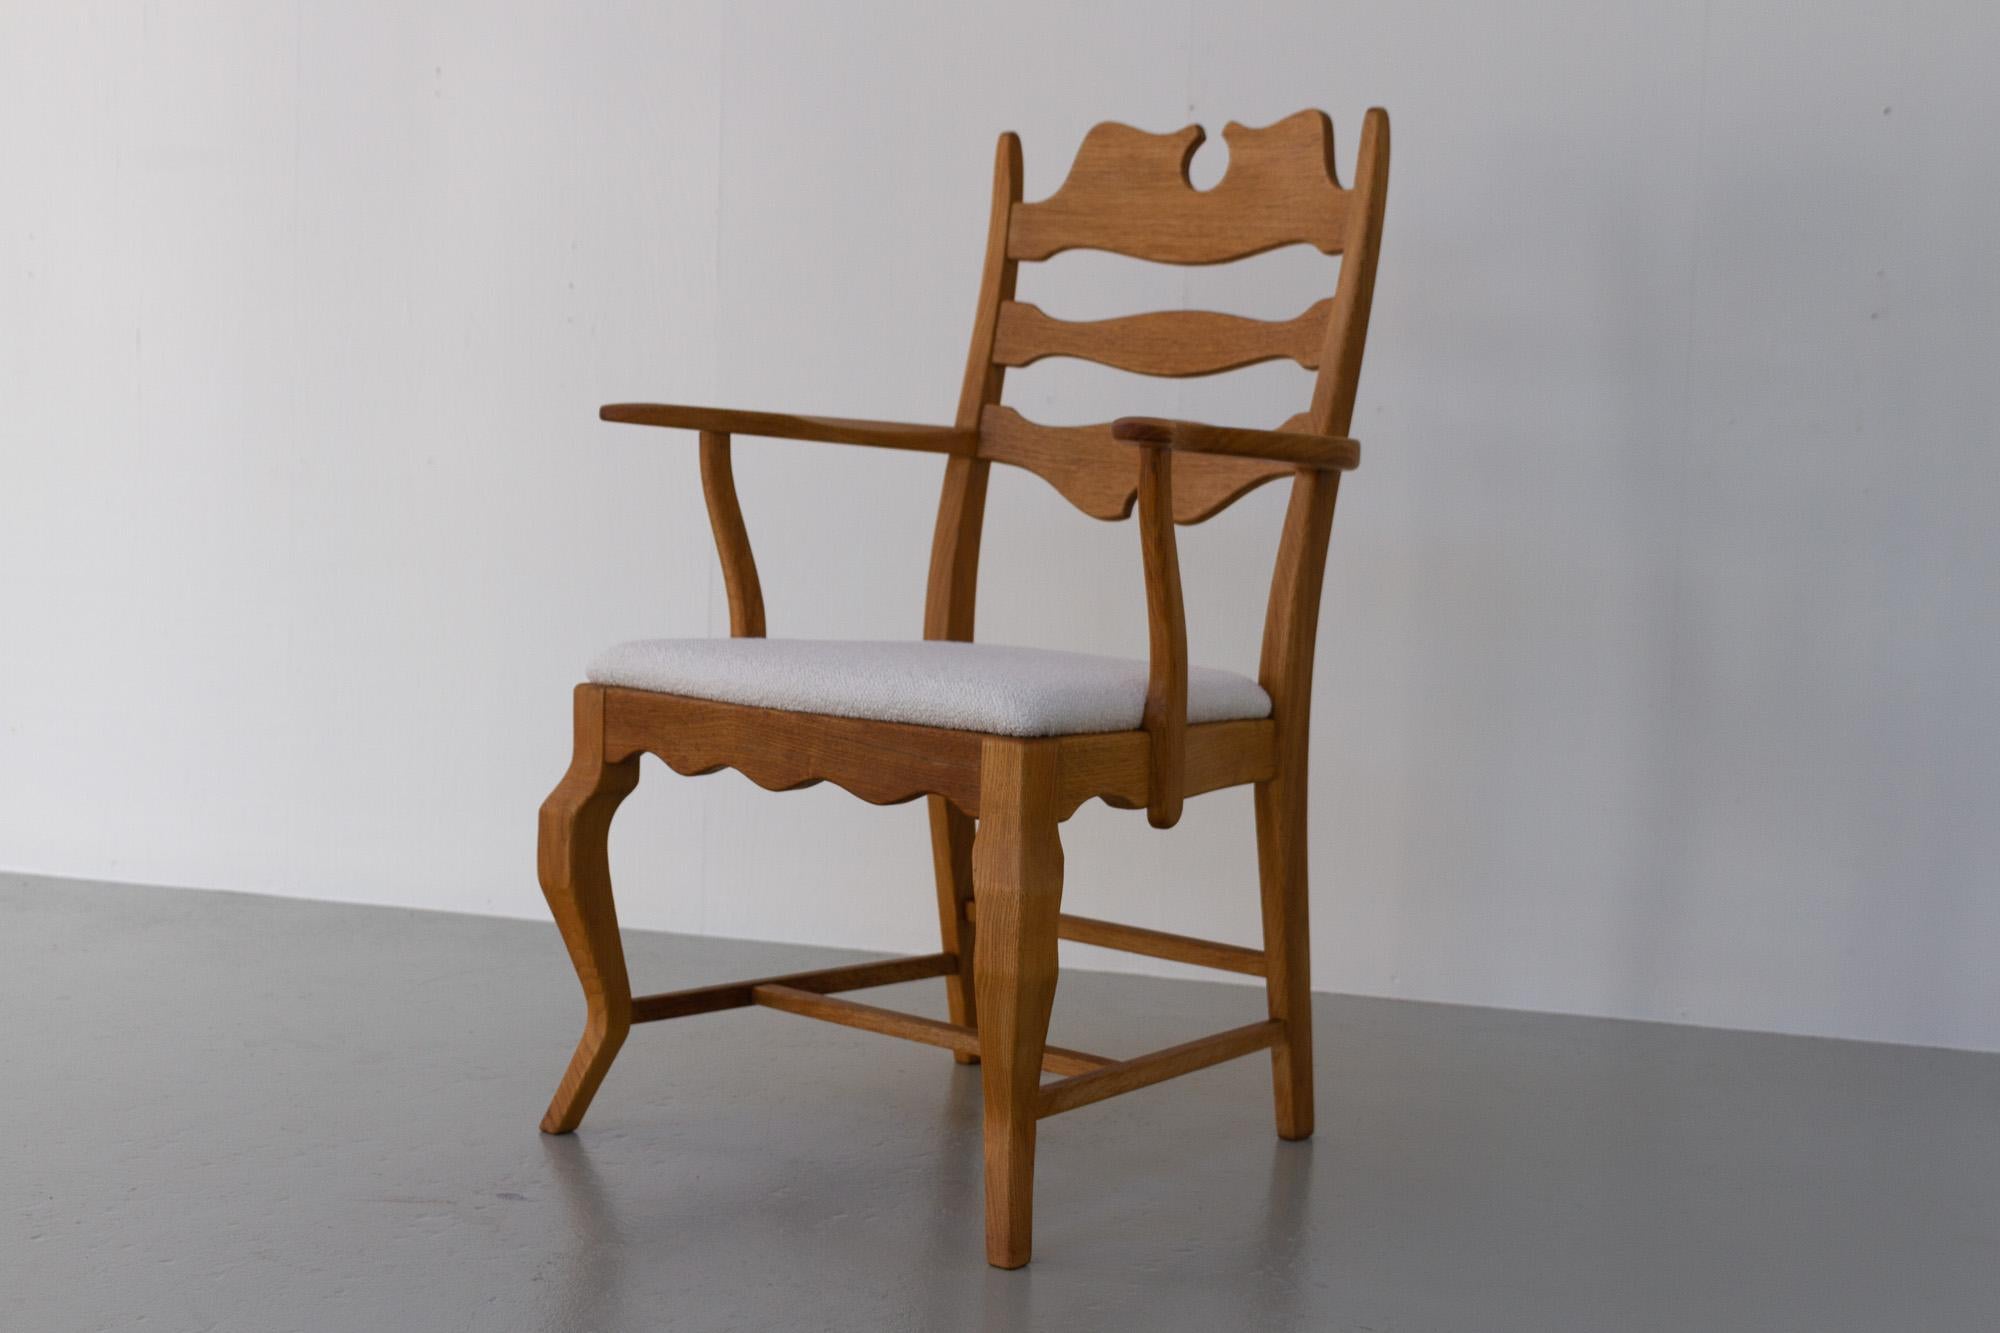 Danish Modern Oak Razor blade Armchair by Henning Kjærnulf for EG Møbler, 1960s.
Vintage Danish arm chair in solid Scandinavian white oak and seat re-upholstered in off-white Bouclé.
A Danish mid-century modern take on the classic baroque